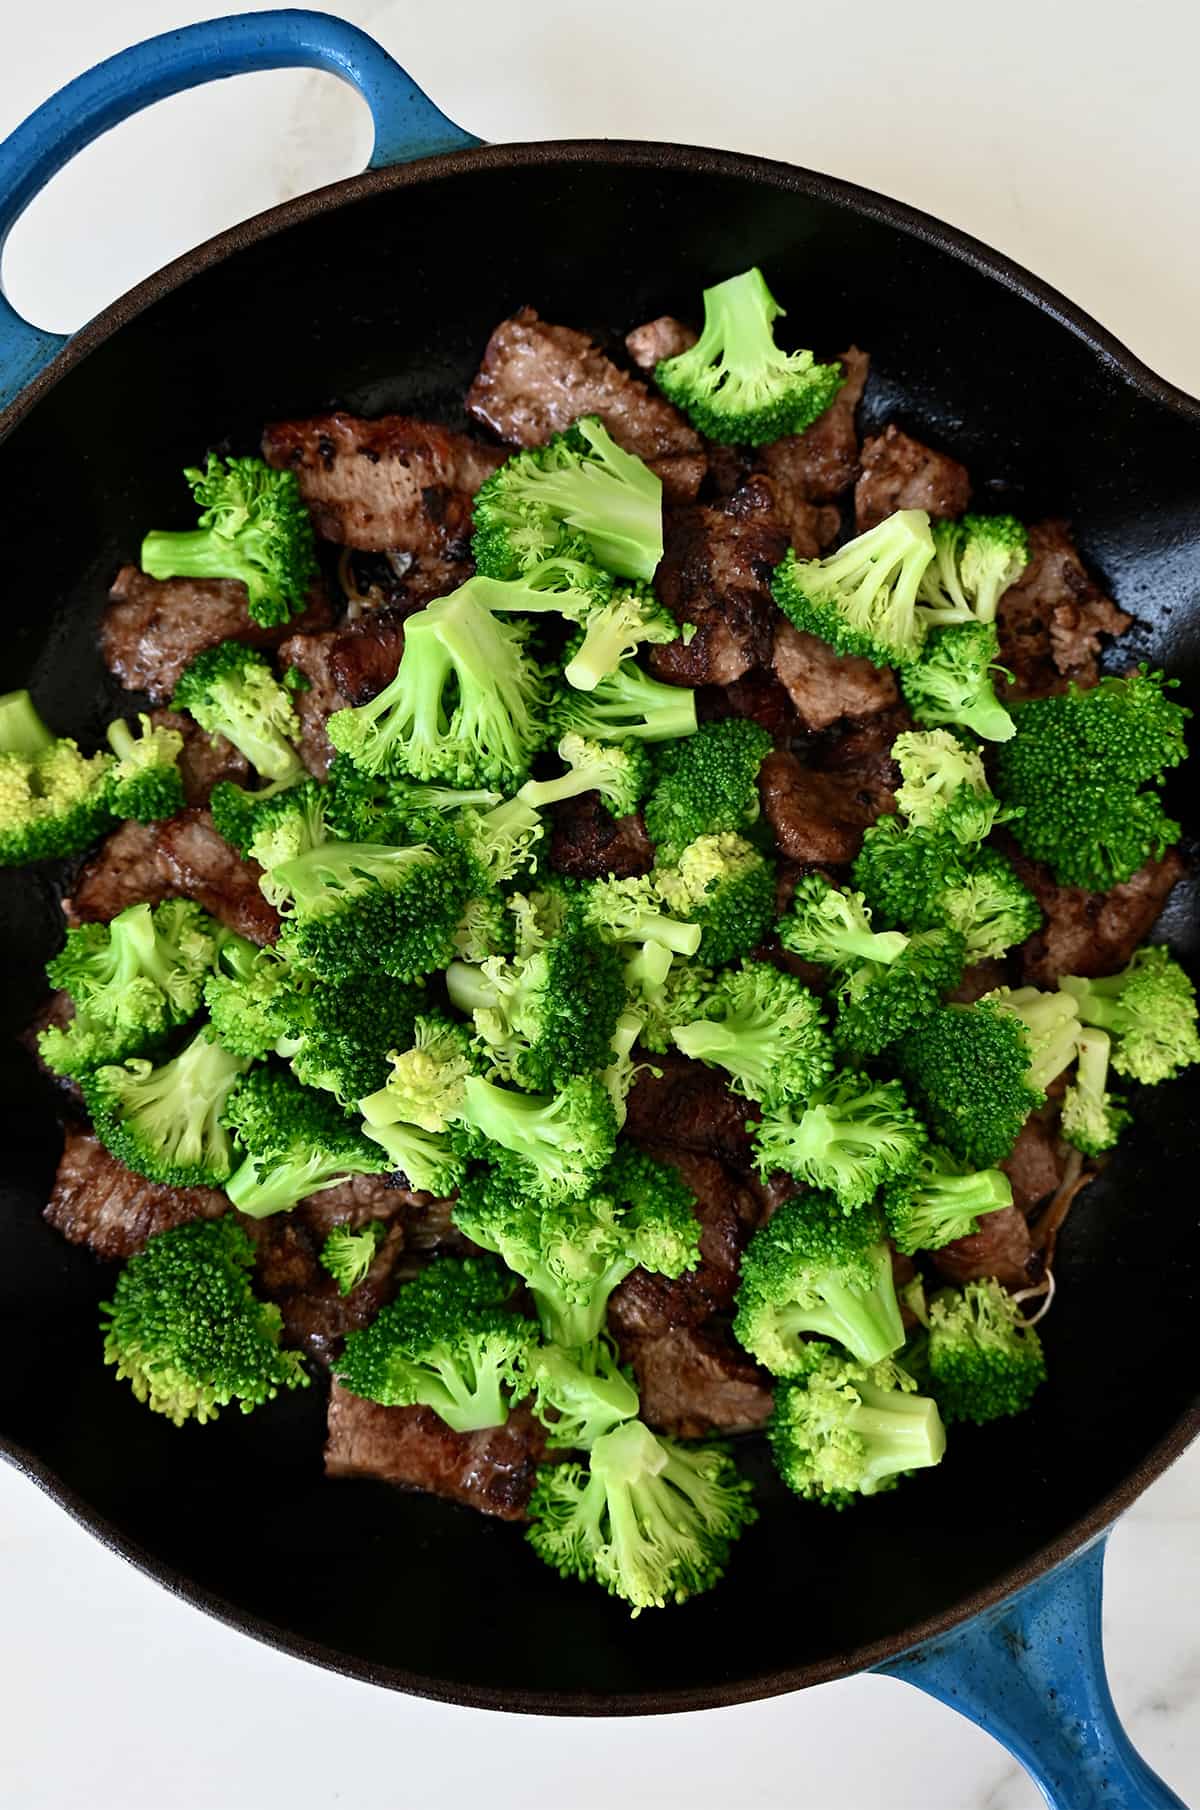 Stir-fried broccoli and beef in a large skillet.